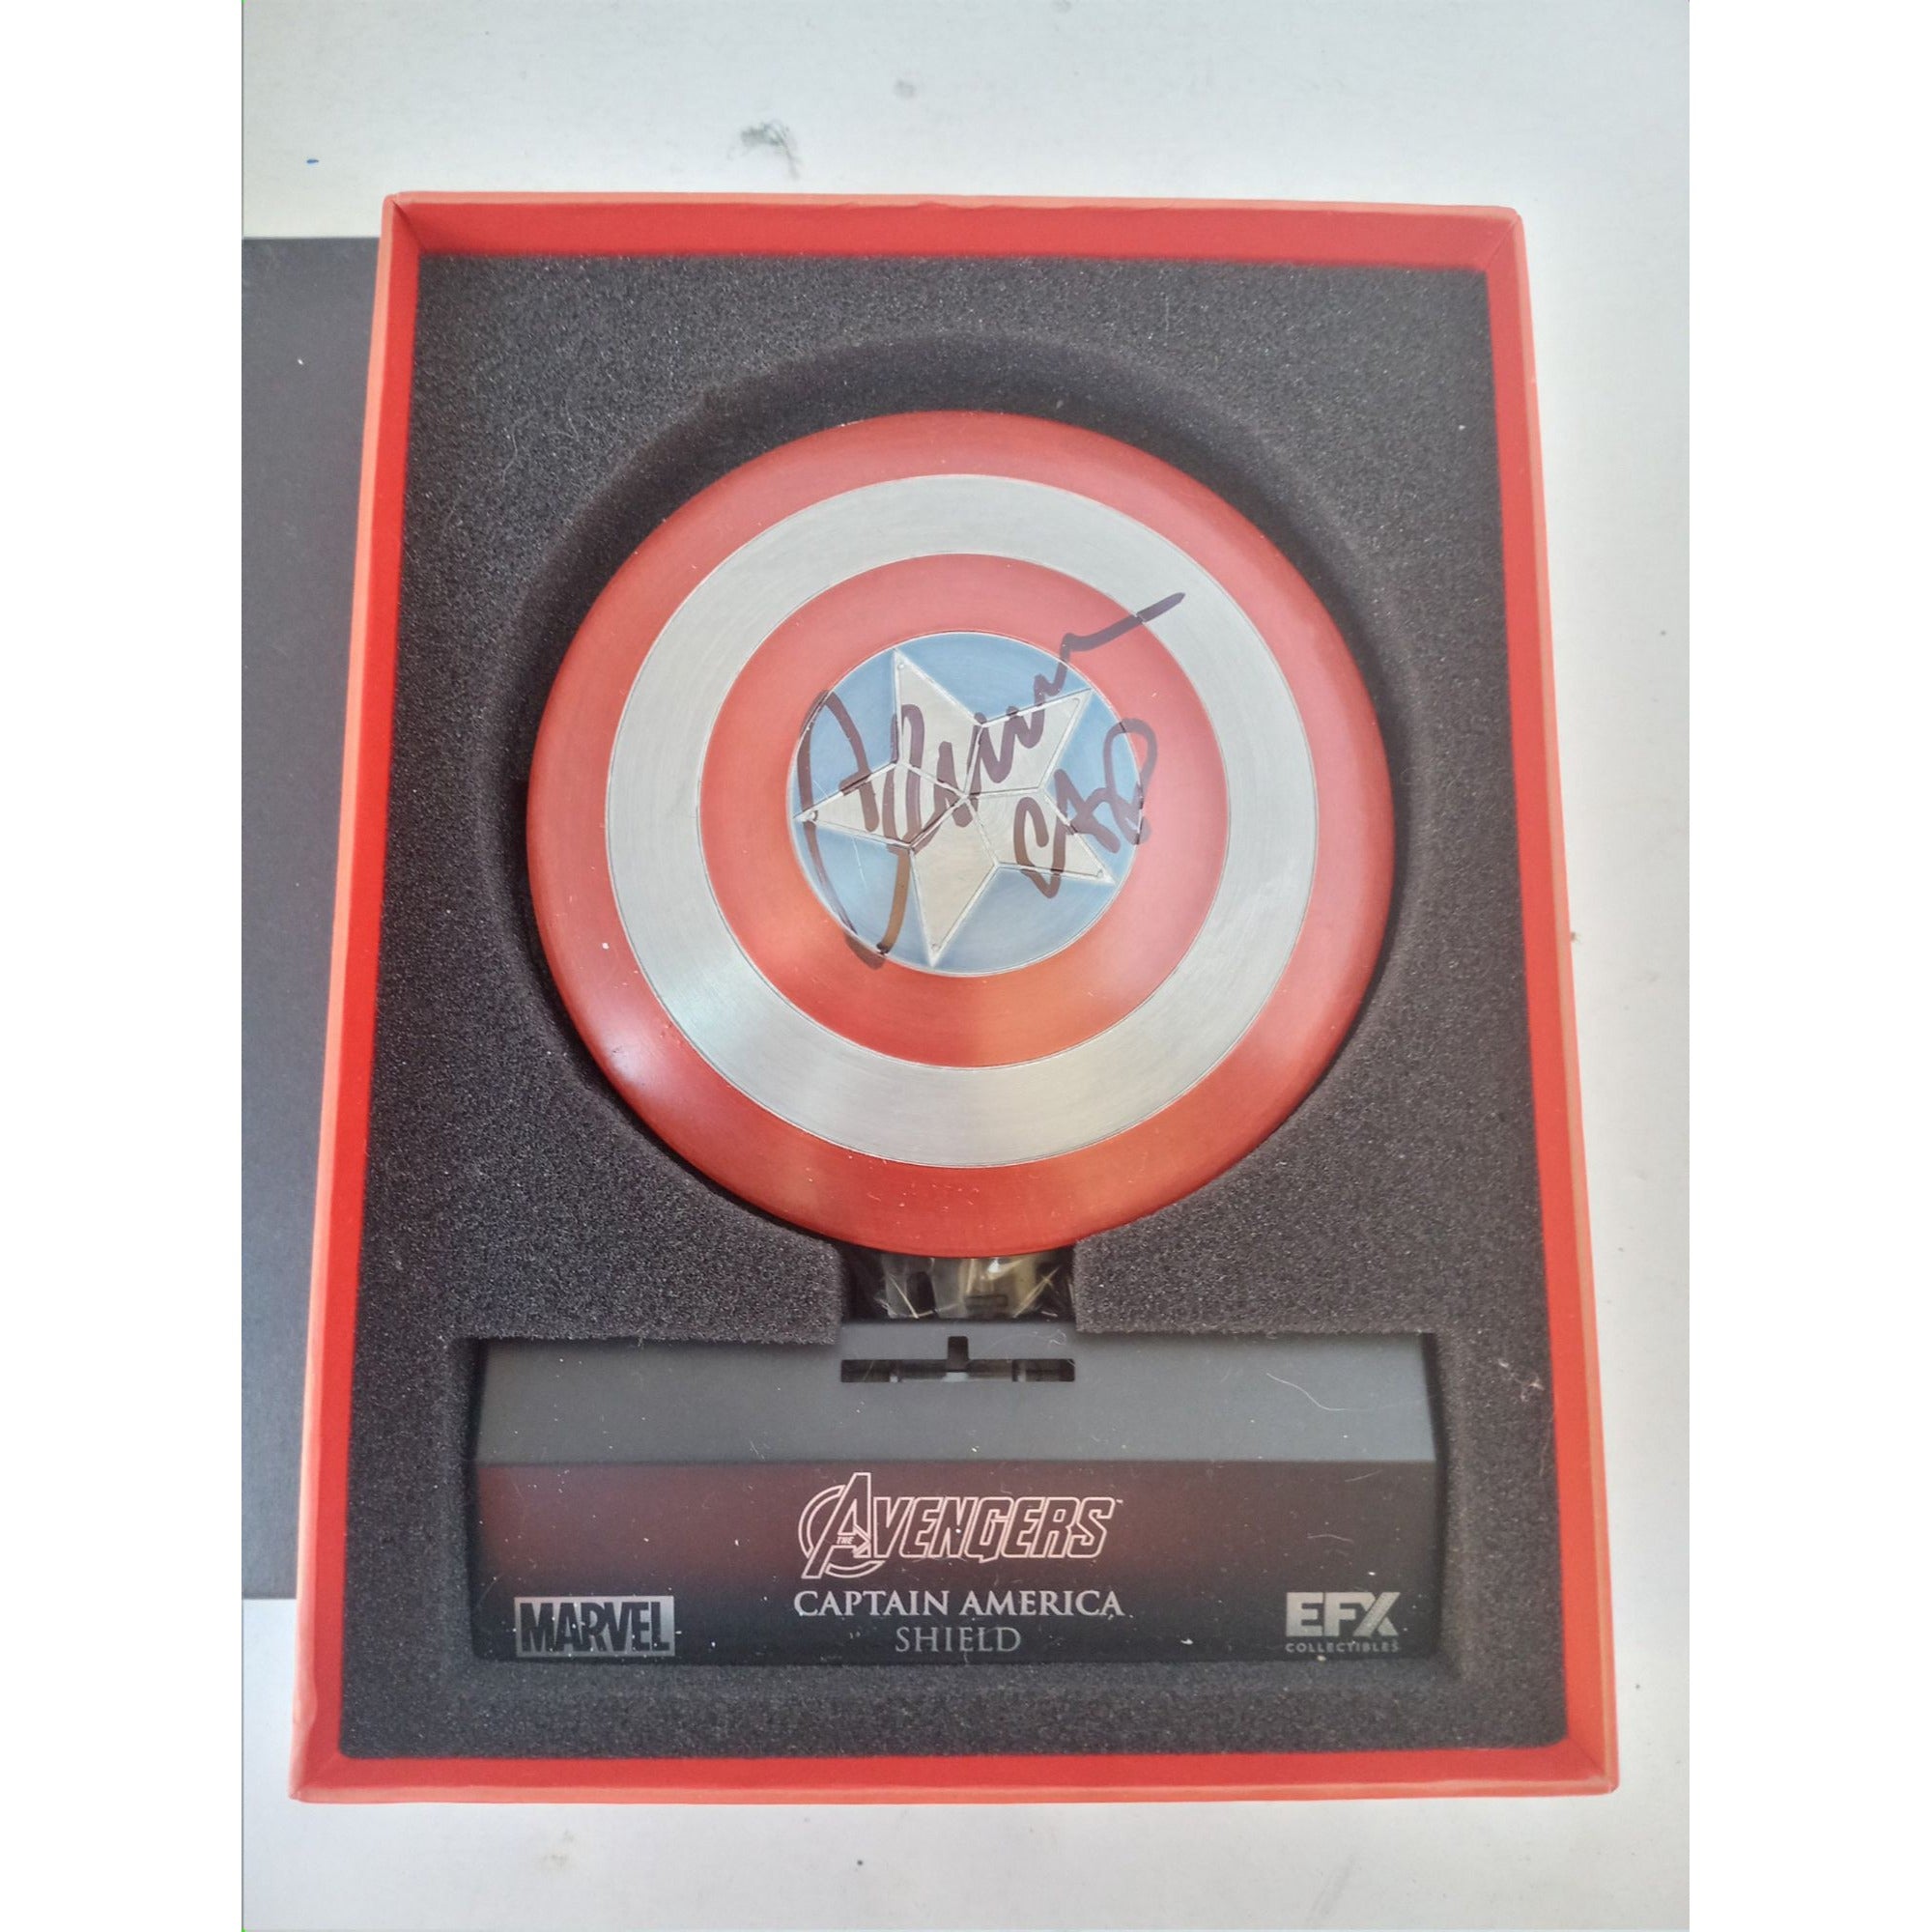 Chris Evans Captain America mini authentic Shield signed with proof